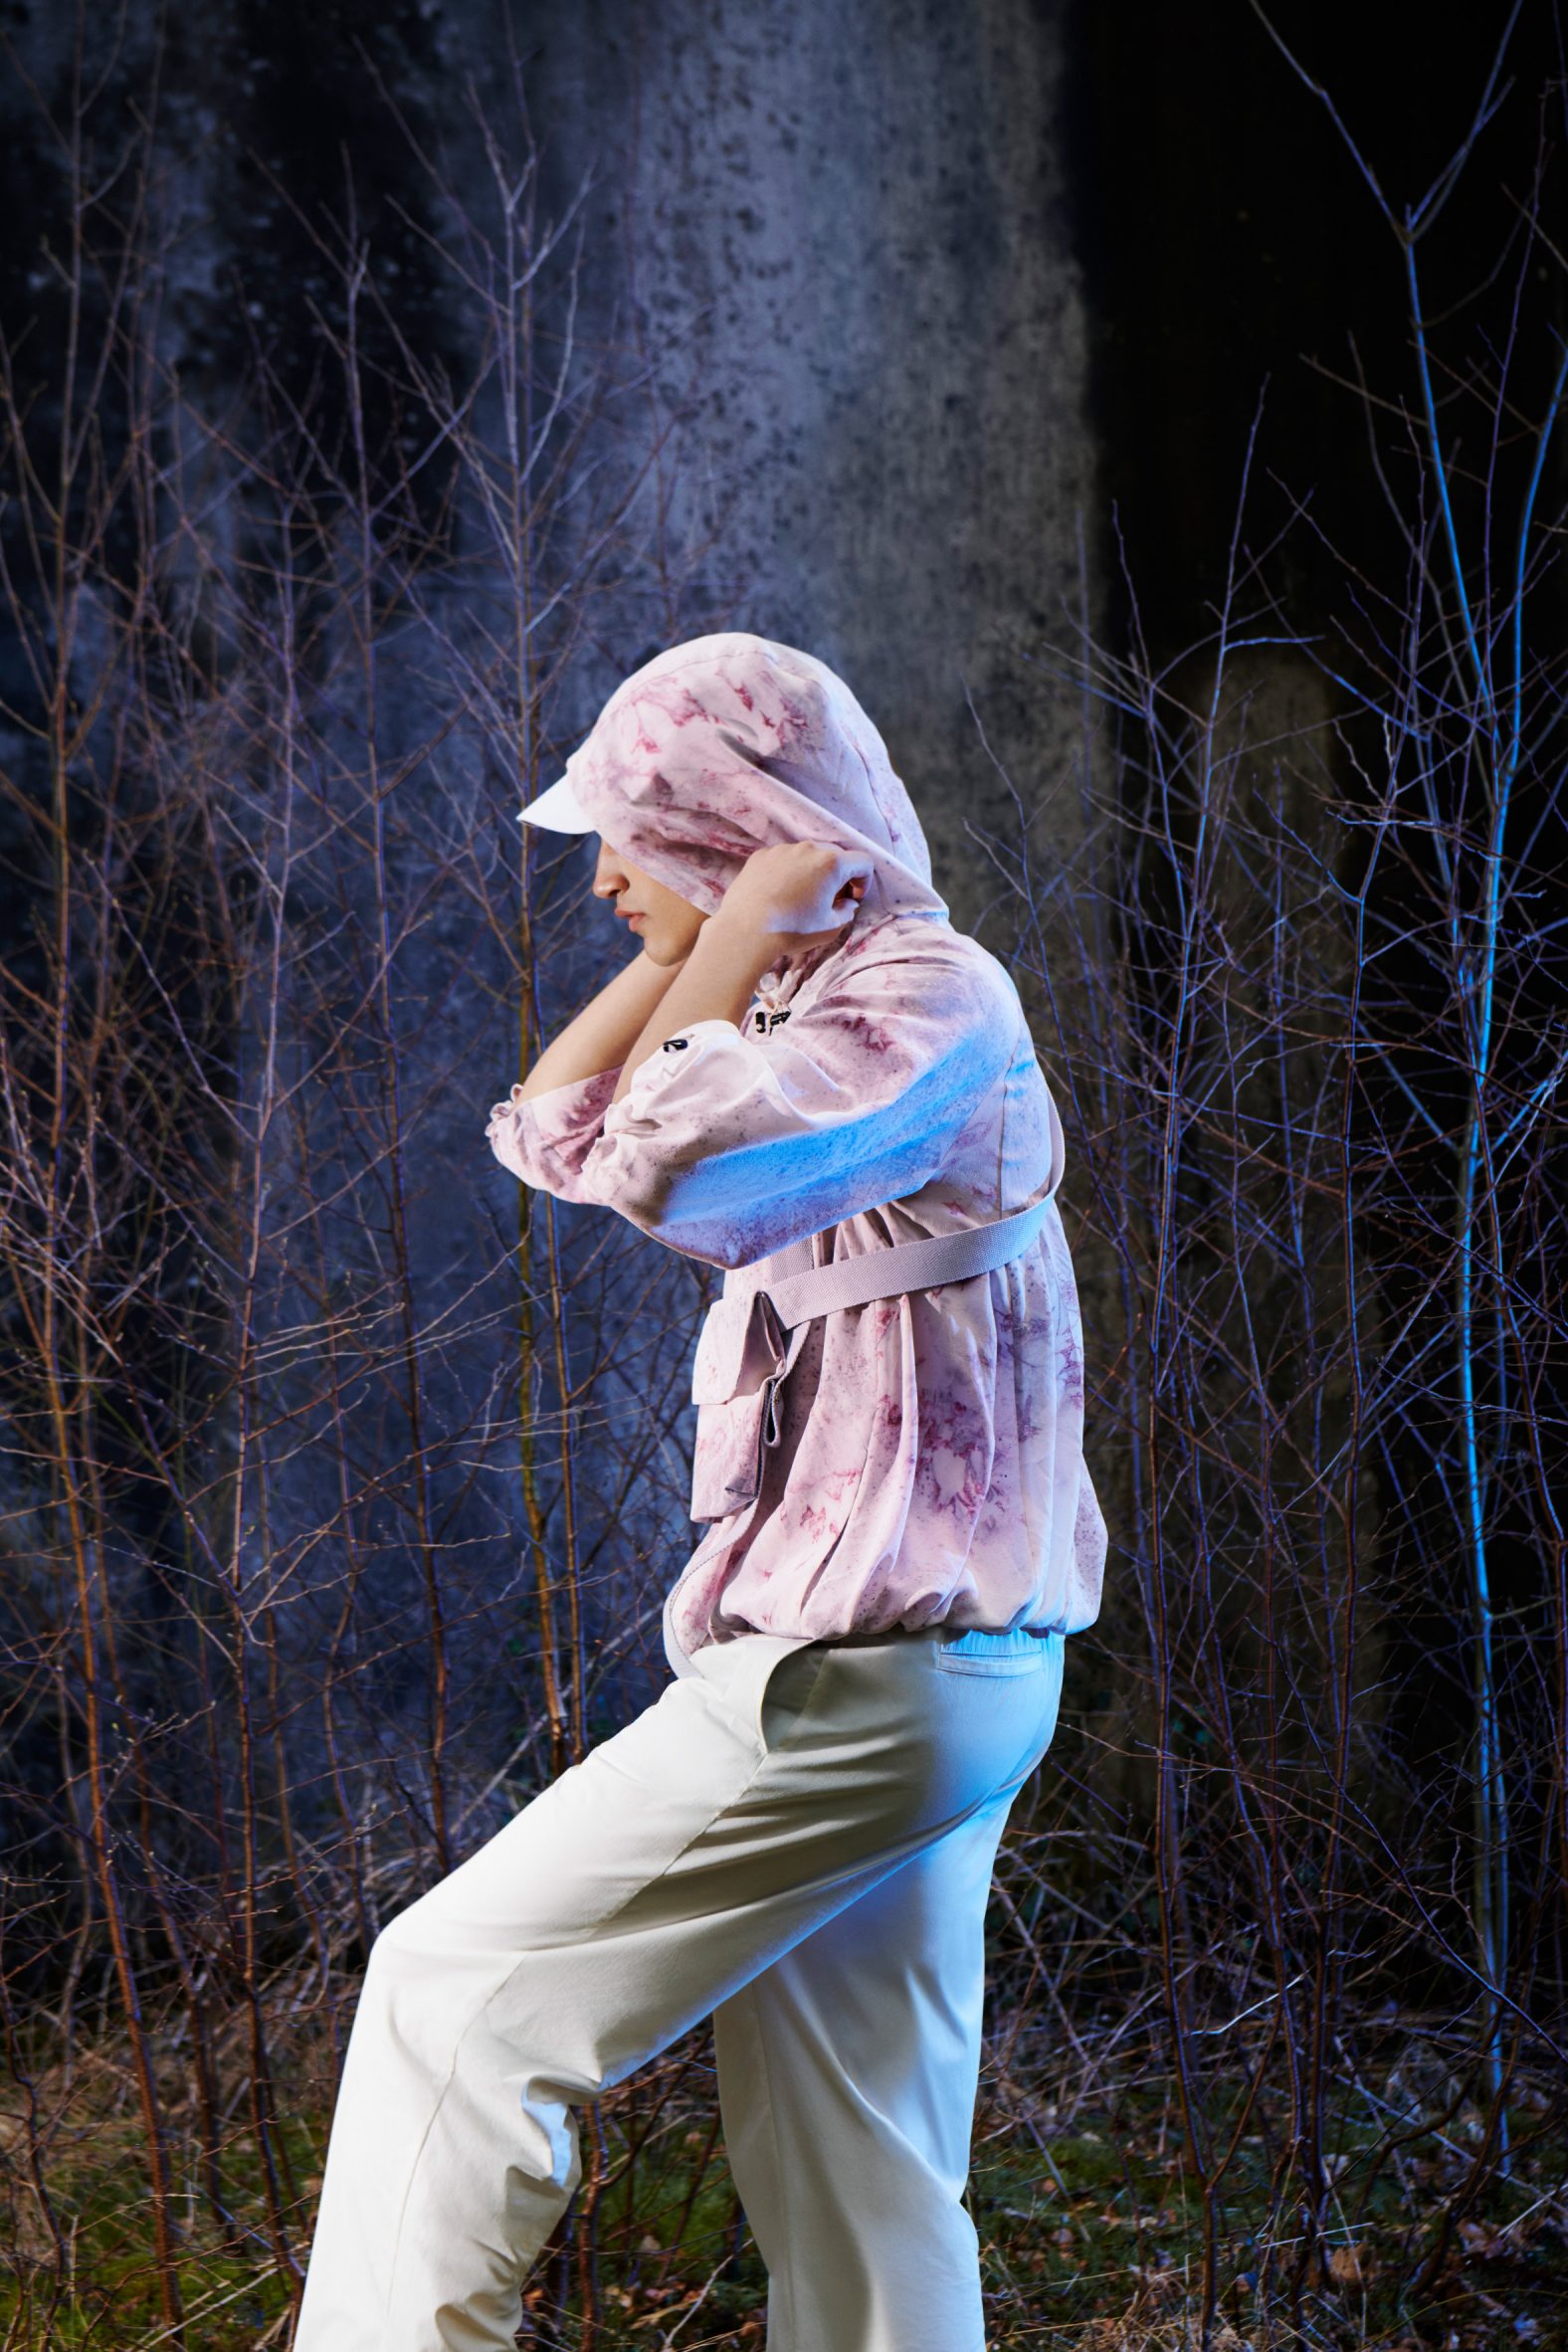 Campaign photo of a person wearing the bacteria-dyed NPOL Exploring jacket lit up while walking through a forest at night